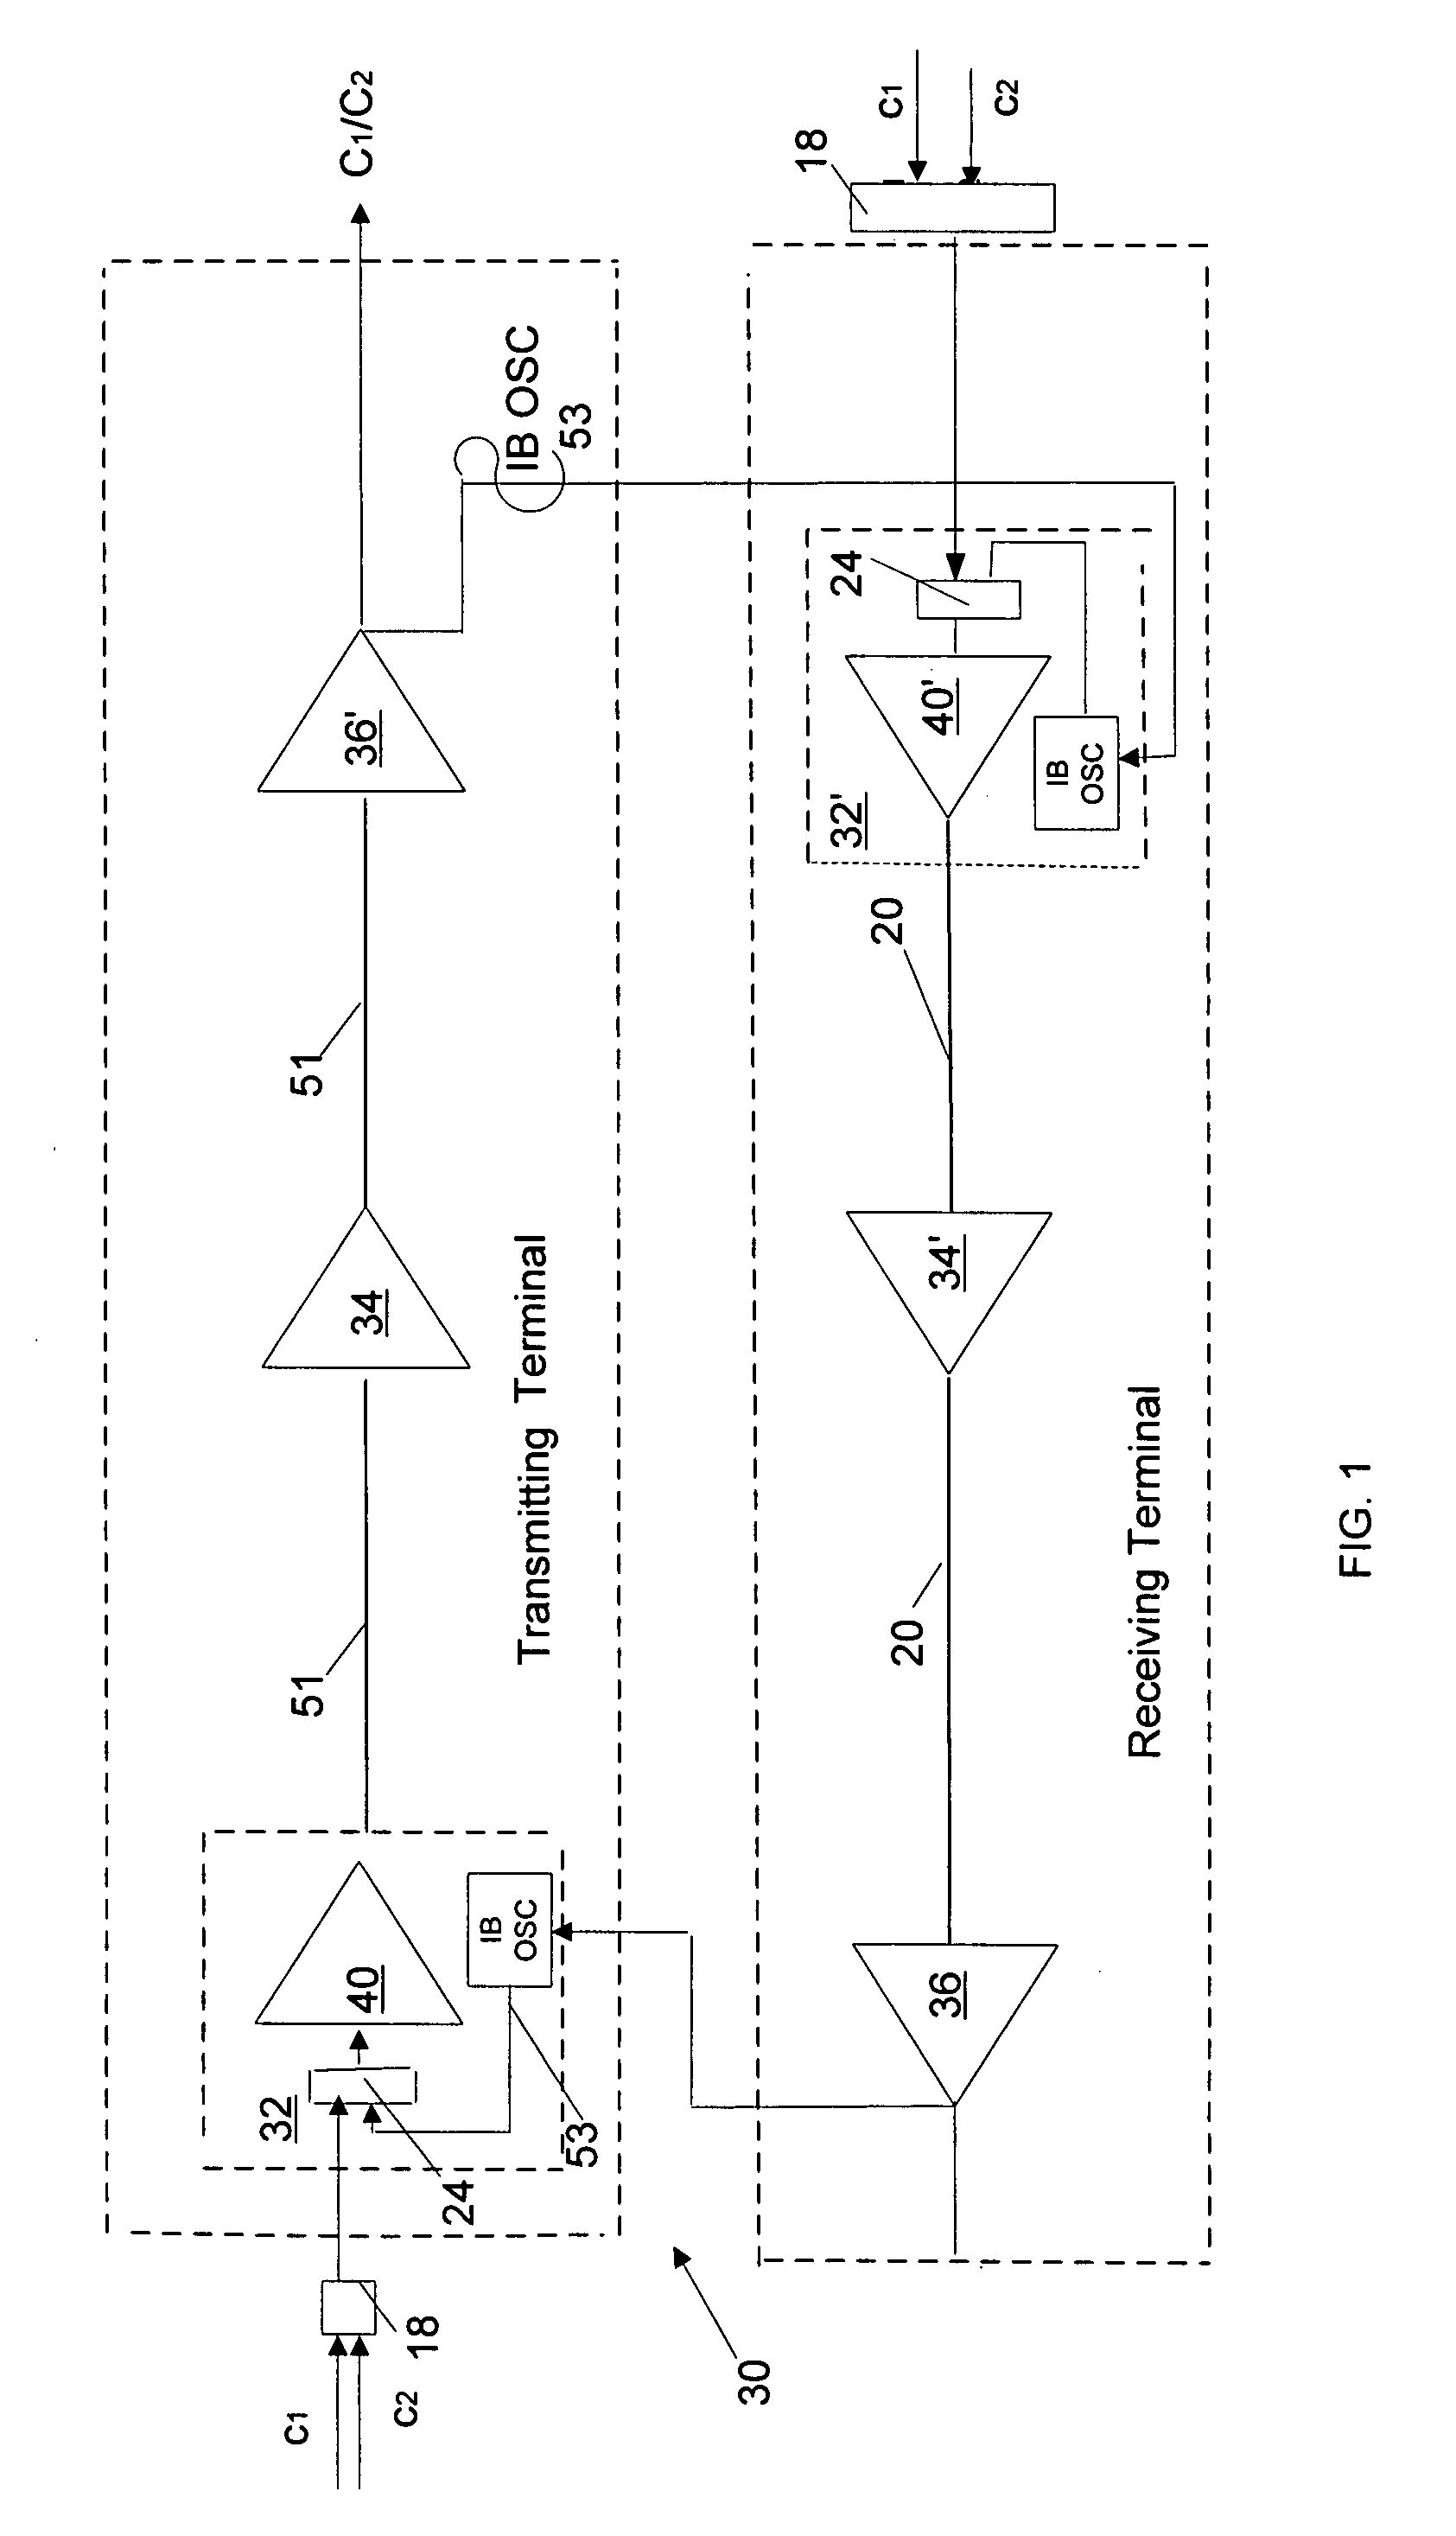 Fiber optic communication system with automatic line shutdown/power reduction